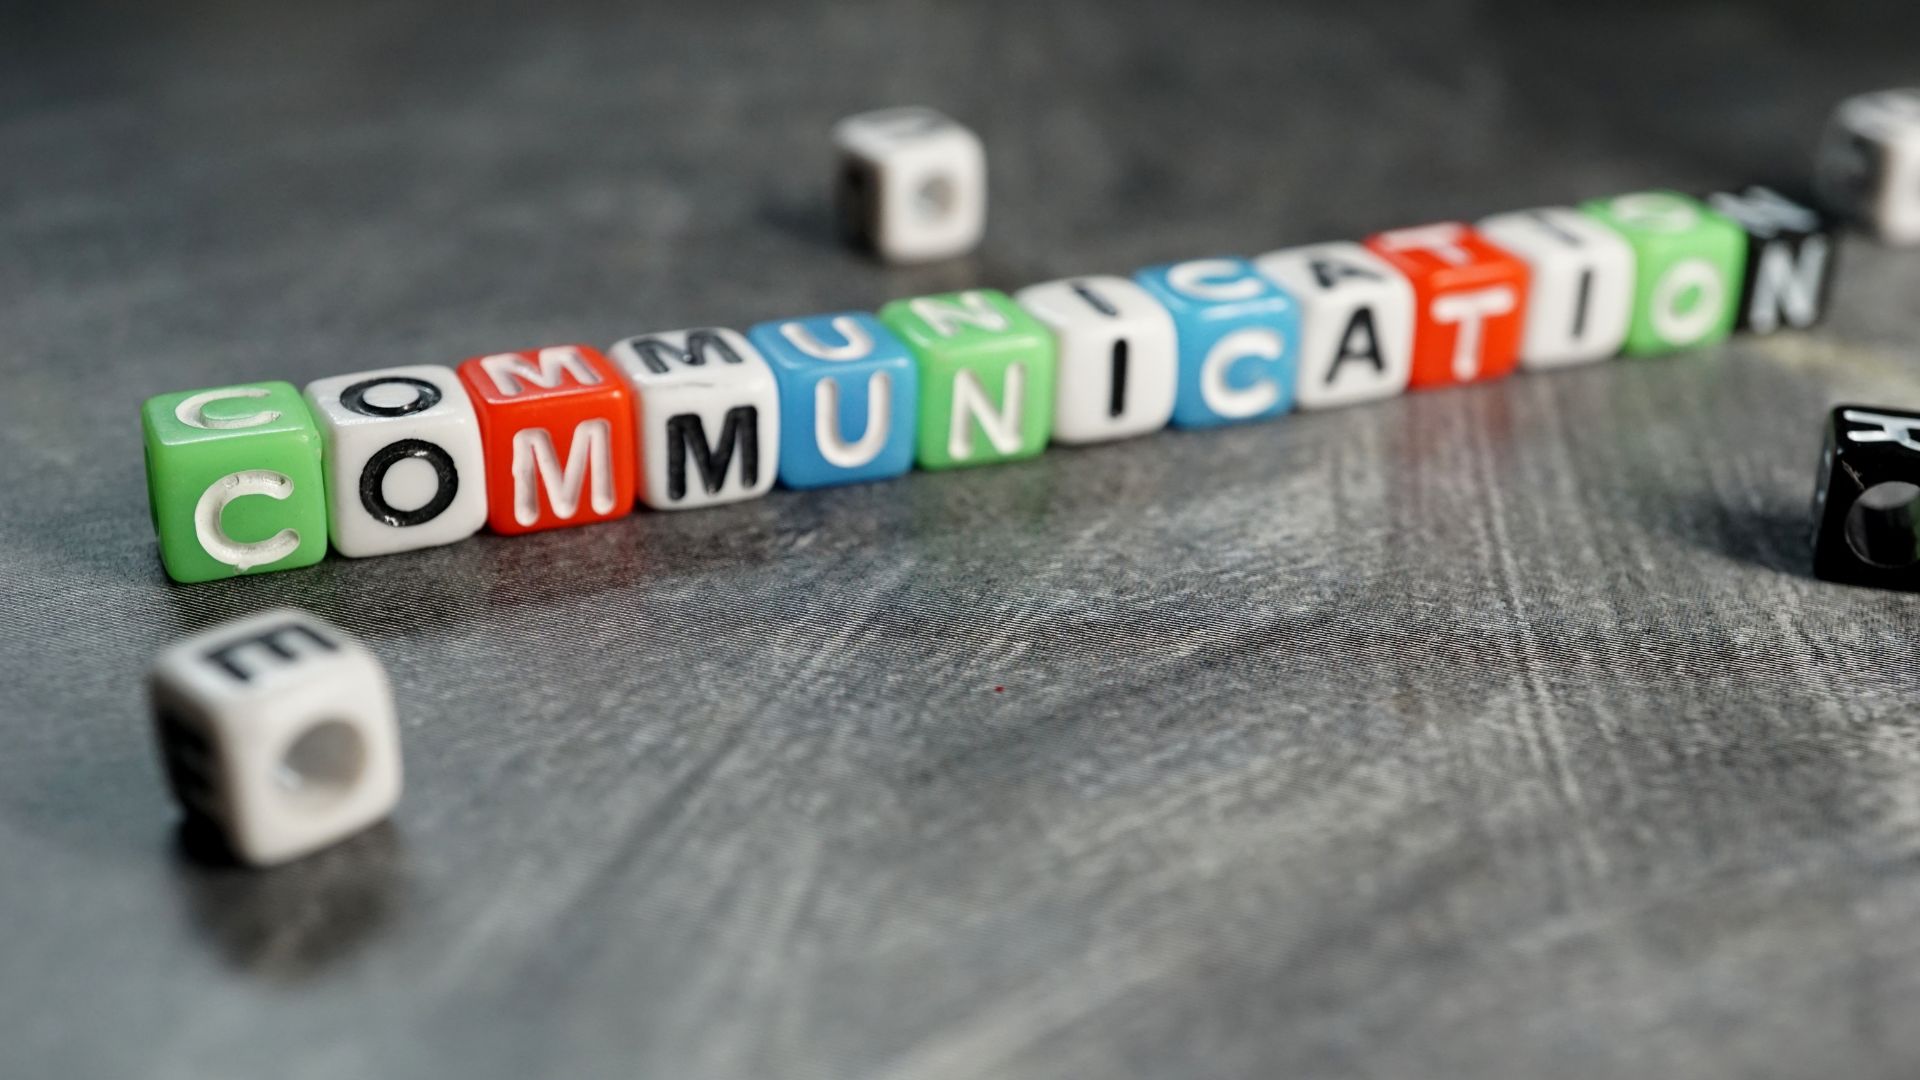 Colourful lettered dice arranged on a grey fabric surface to spell out the word 'COMMUNICATION' in a diagonal line. The dice feature a variety of vibrant colors like green, red, blue, and white, with each cube displaying a single letter. The image conveys the concept of building effective communication, essential in various contexts such as business and personal relationships.